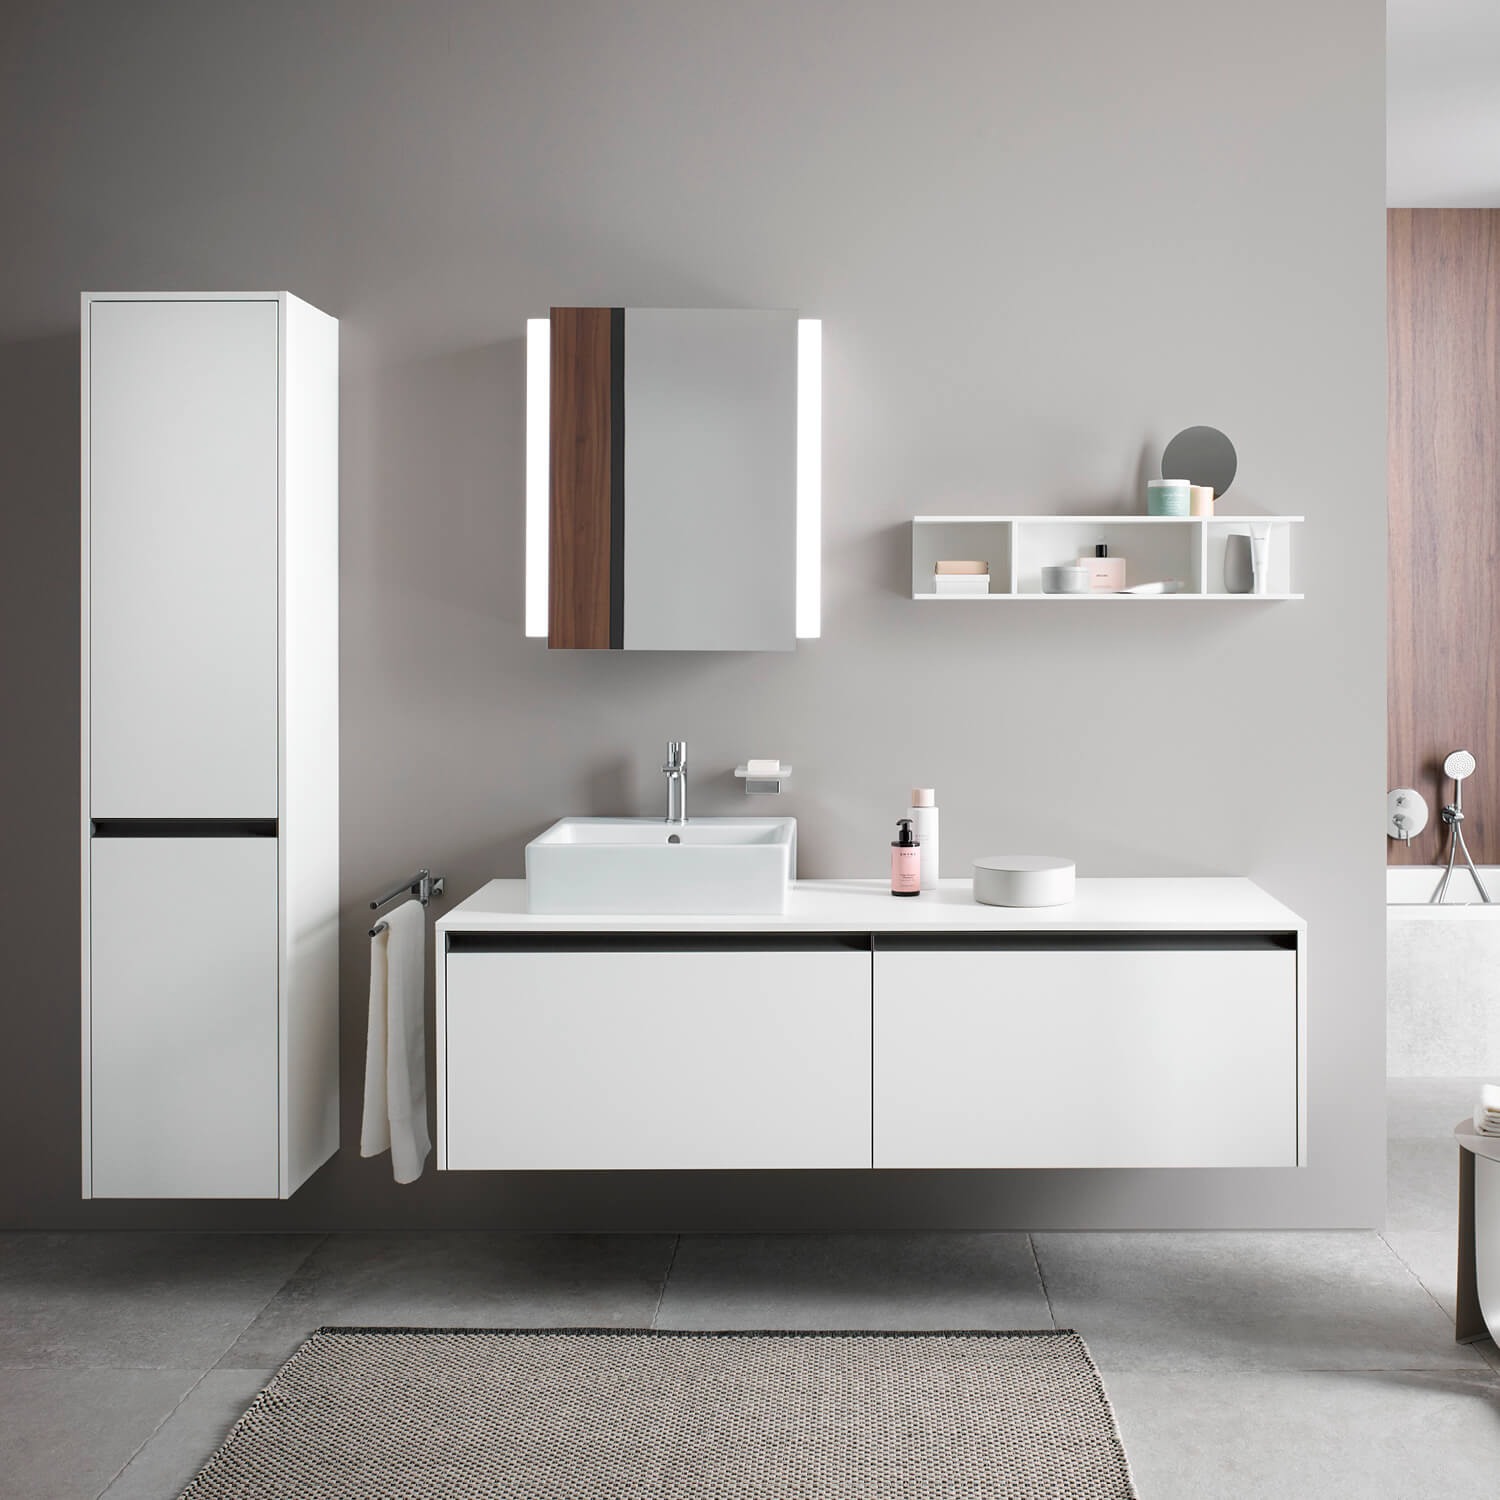 
Modern bathroom with white Ketho.2 wooden furniture
